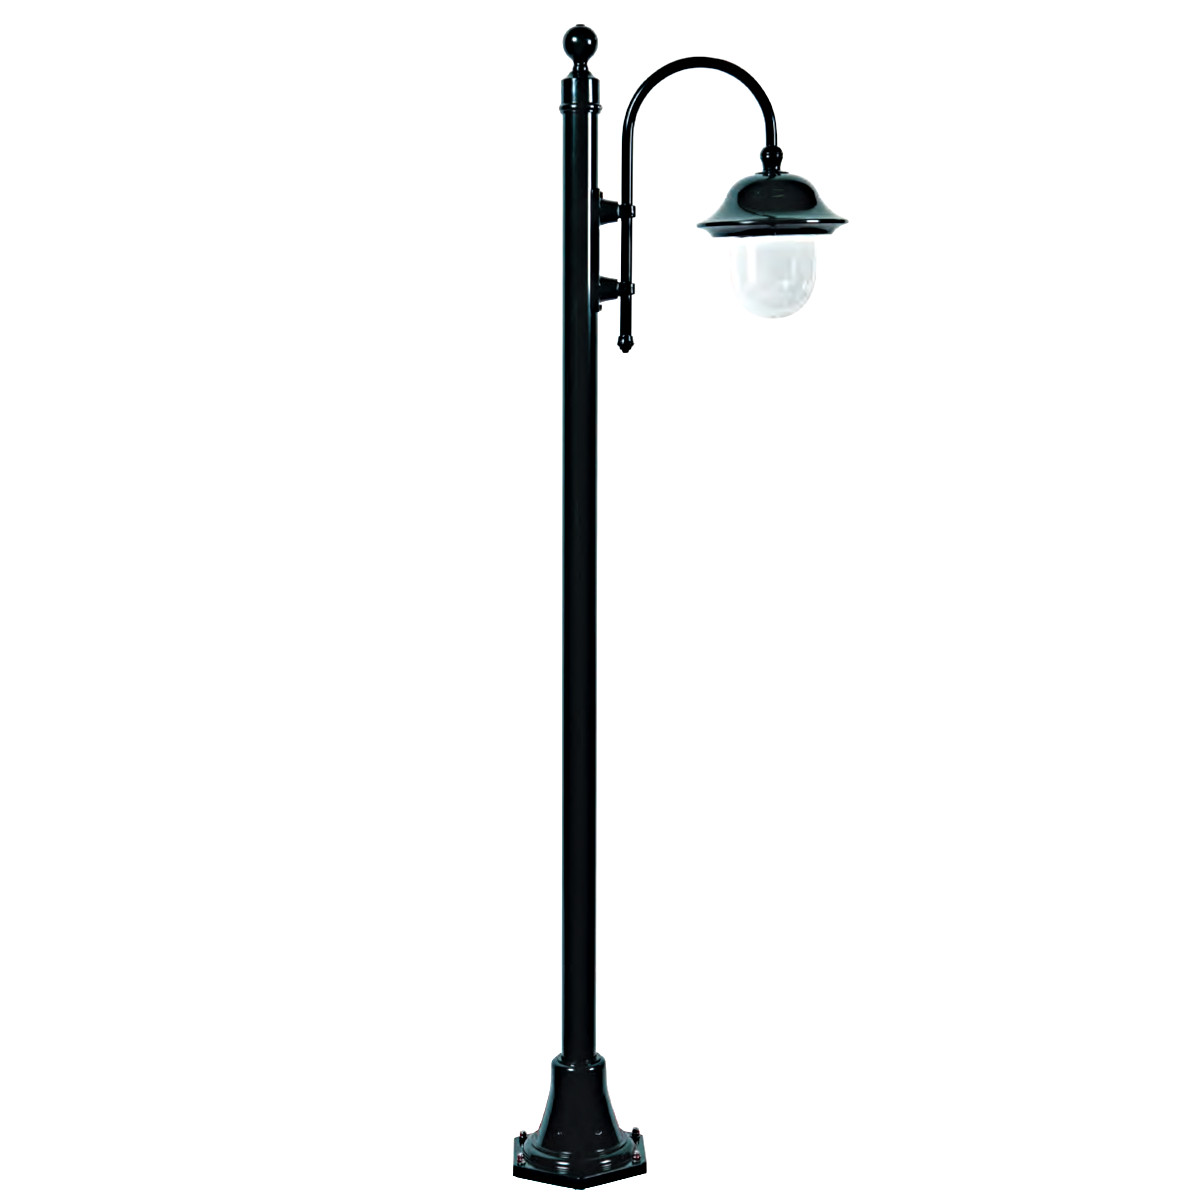 Italian Lamppost with Bow Arm Boom